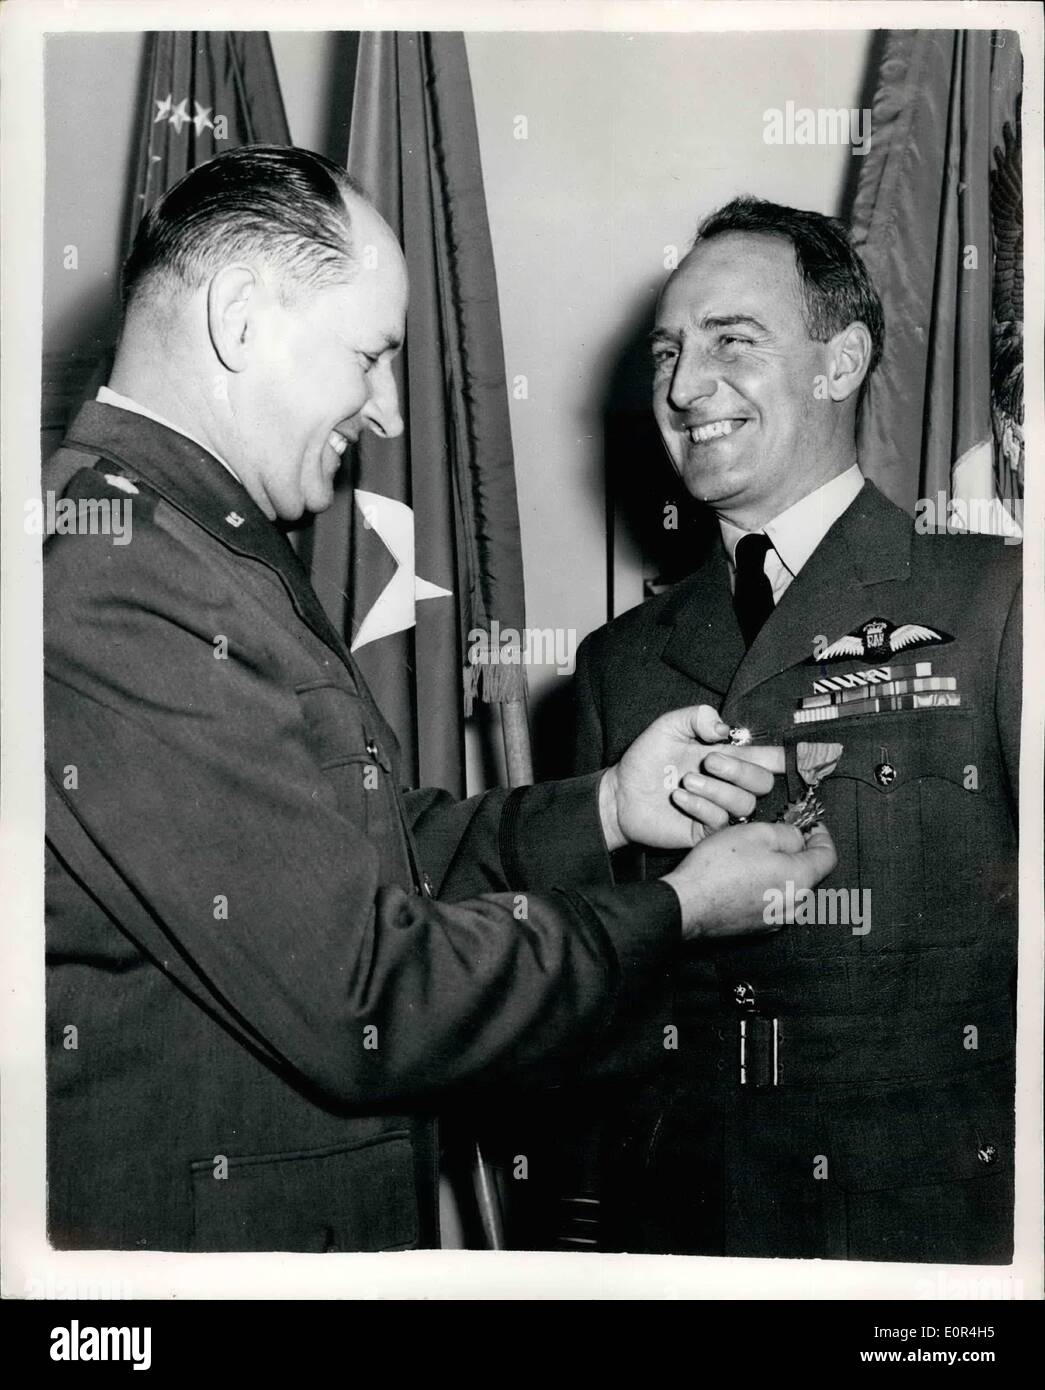 Mar. 03, 1958 - R.A.F. Officer recieves United States air medal award.: Squadron Leader Colin L. Blythe D.F.C., A.F.C., R.A.F. this afternoon received the United States Air Medal from Brig. Gen. Frank B. James, United States Air Attache - at latter's London office. The award was made fo ~~~~~. Blythe's acts of meritorious service during the United Nations activities in Korea from March - August 1951. At that time the Sdr. Ldr. was serving with No. 77 Sqd. Royal Australian Air Force attached to the 5th. U.S. Air Force, United Nations Command. Photo shows Squadron leader Colin I. Blythe, D.F.C Stock Photo